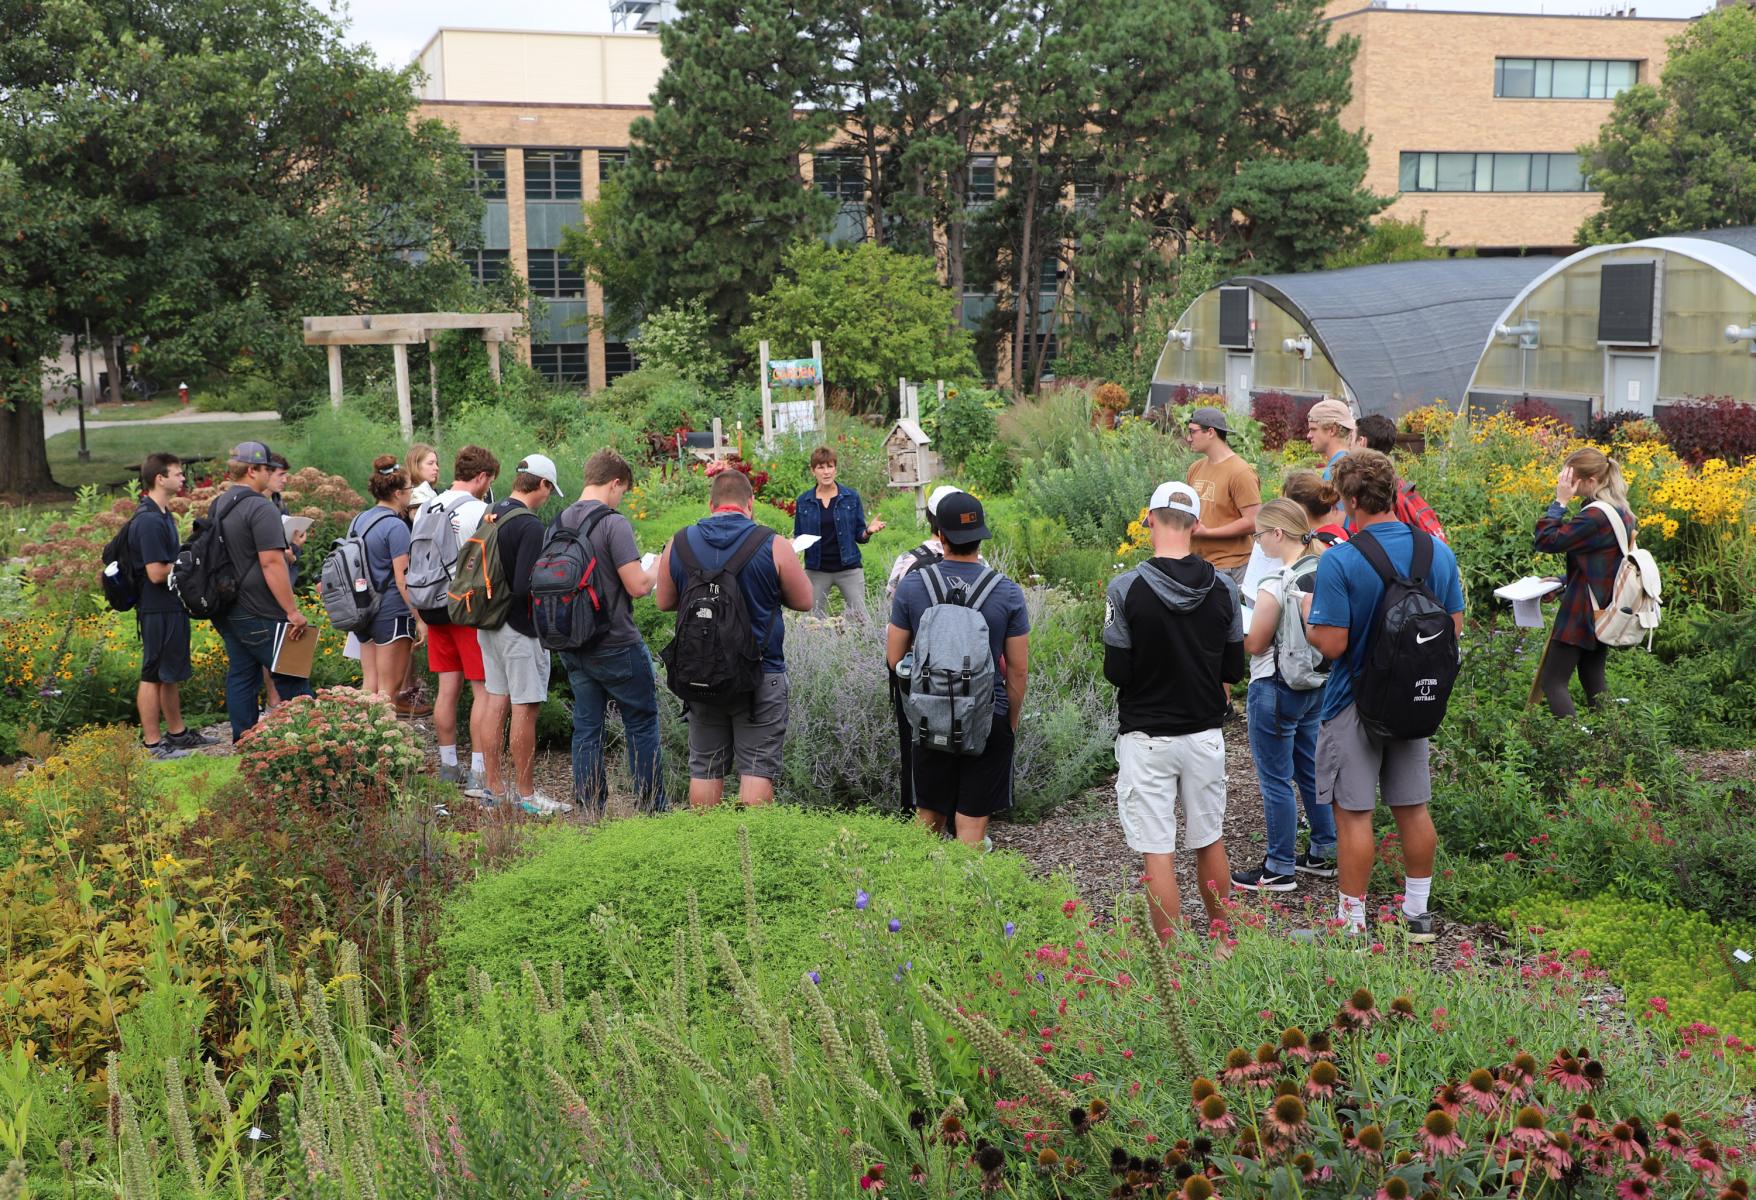 Kim Todd, Department of Agronomy and Horticulture associate professor and extension horticulture specialist, teaches Horticulture 212 Woody Plants for Landscapes class in the Backyard Farmer Garden east of Keim Hall.